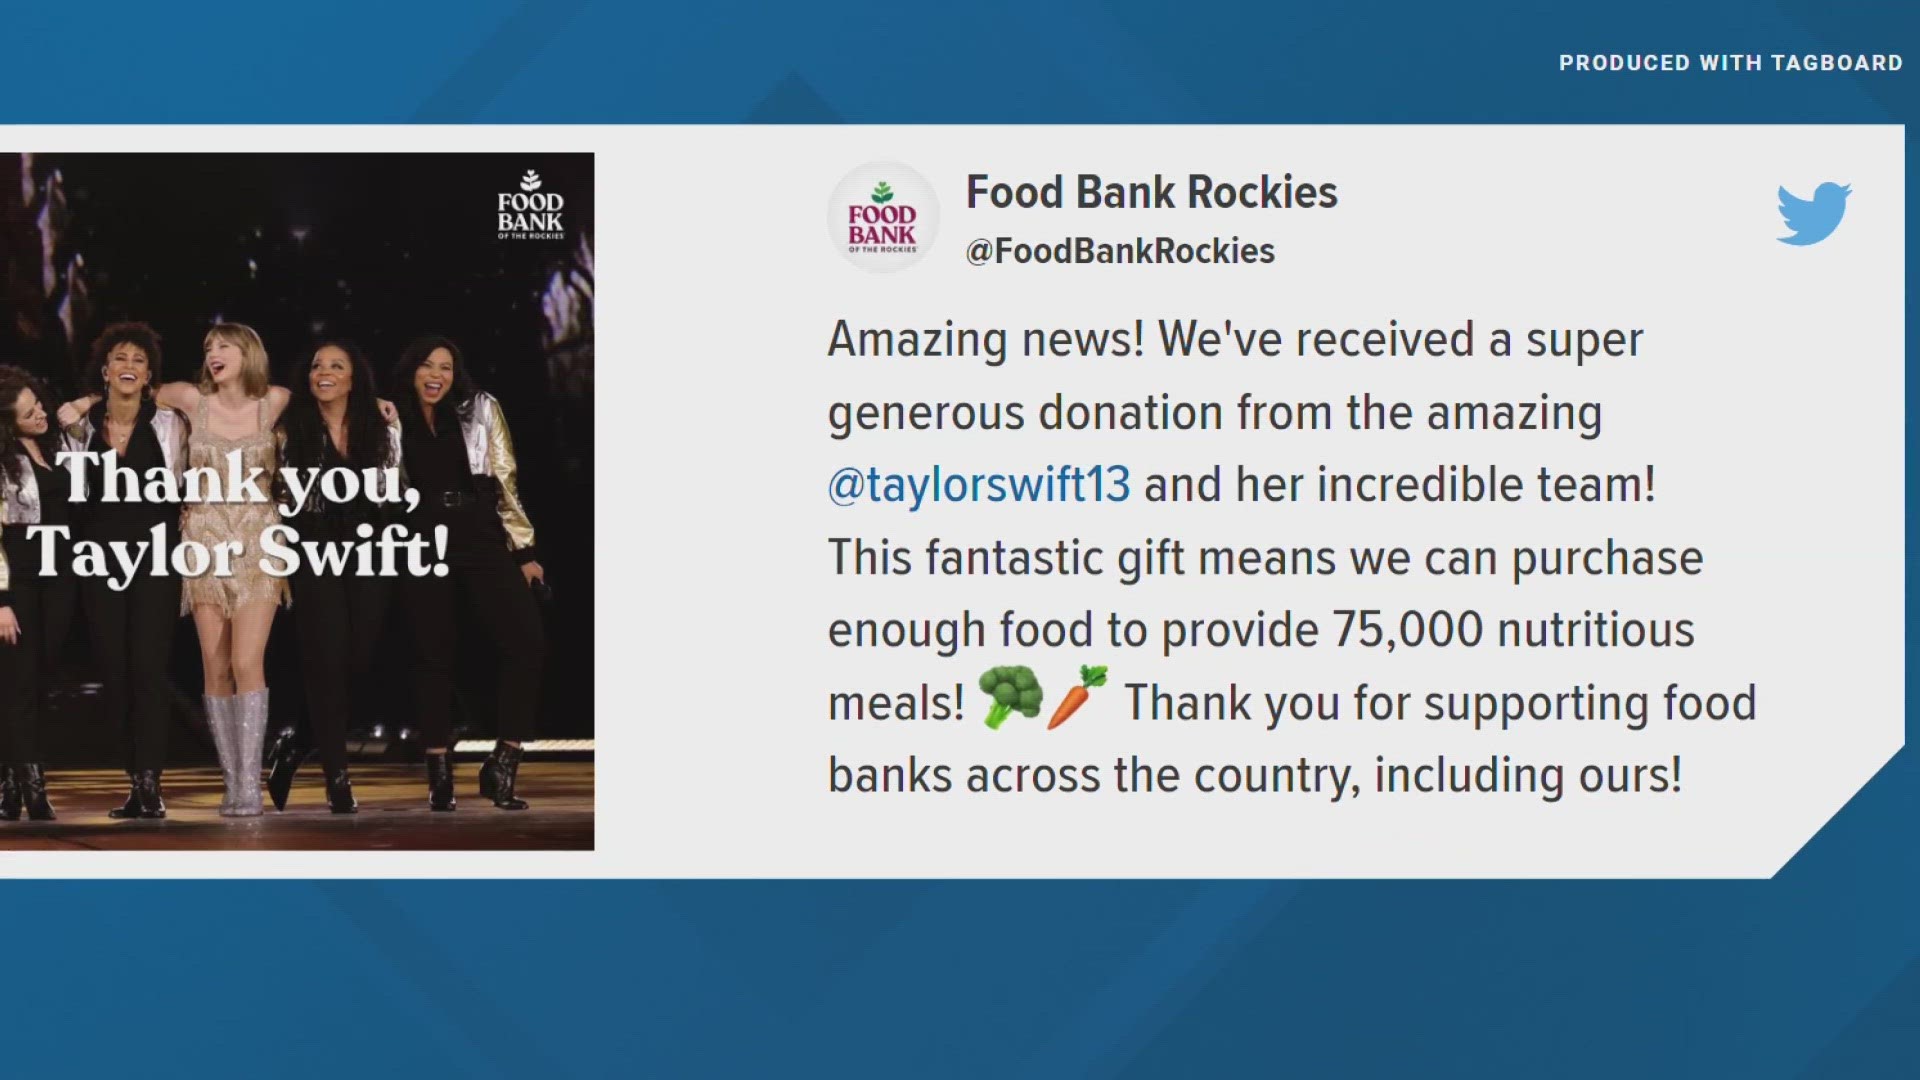 Taylor Swift has been donating to food banks across the country during her "Eras Tour."